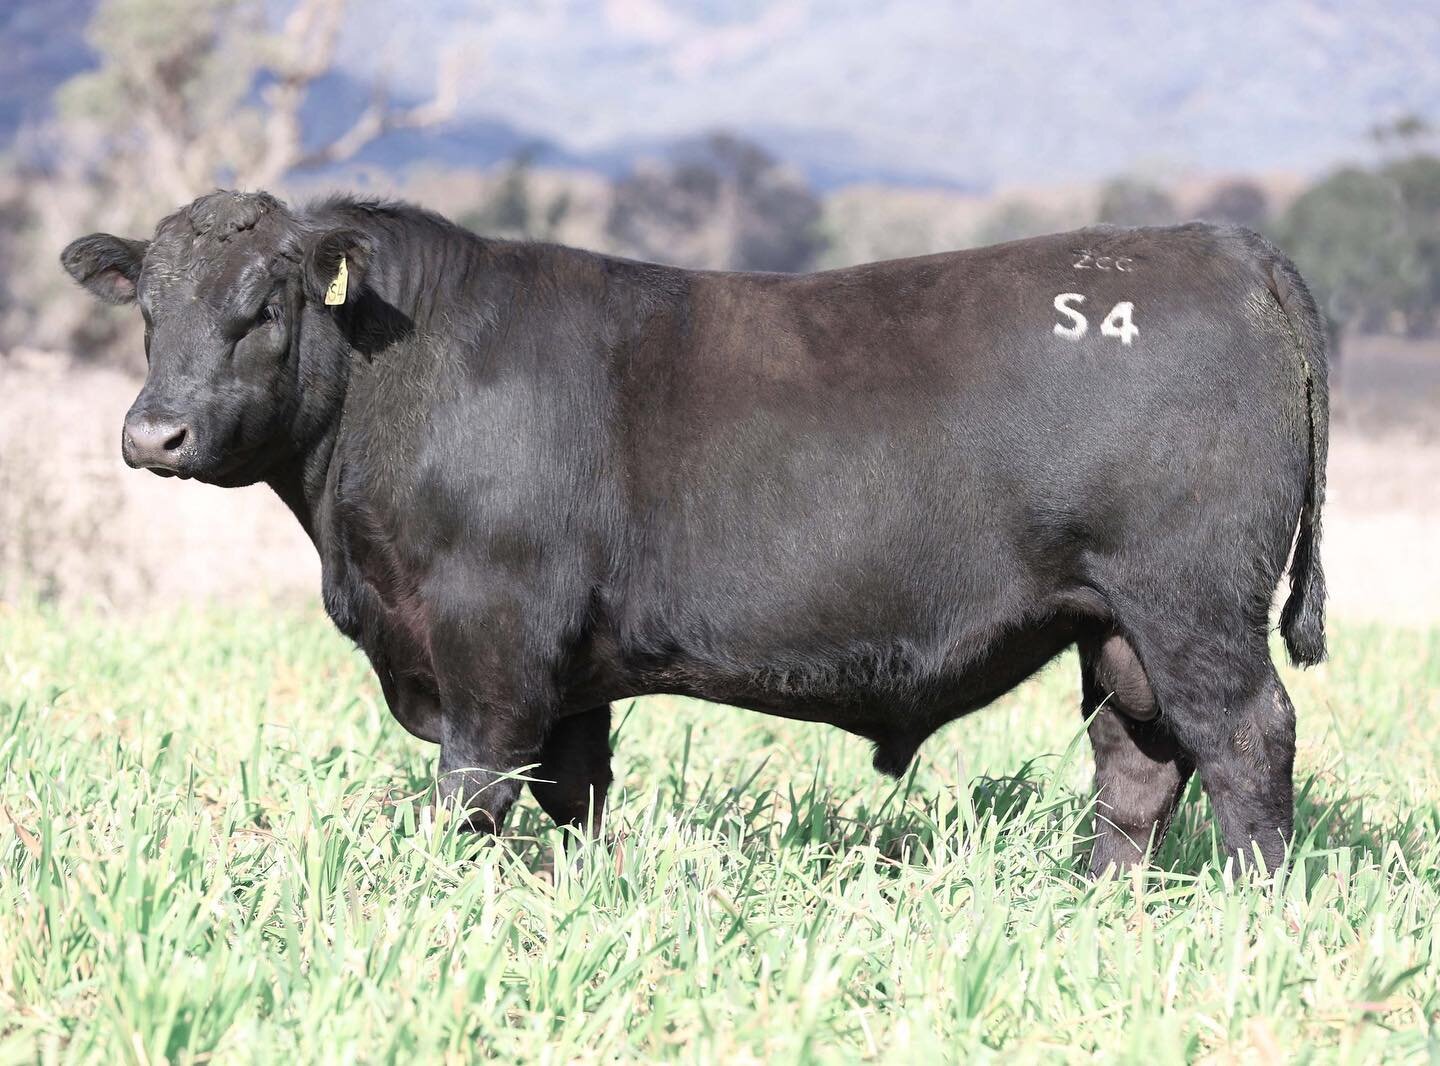 Command sons were the highest averaging sire group last year and we have 10 more on offer this year including the outstanding bull at Lot 4. They are versatile bulls with phenotype and figures.